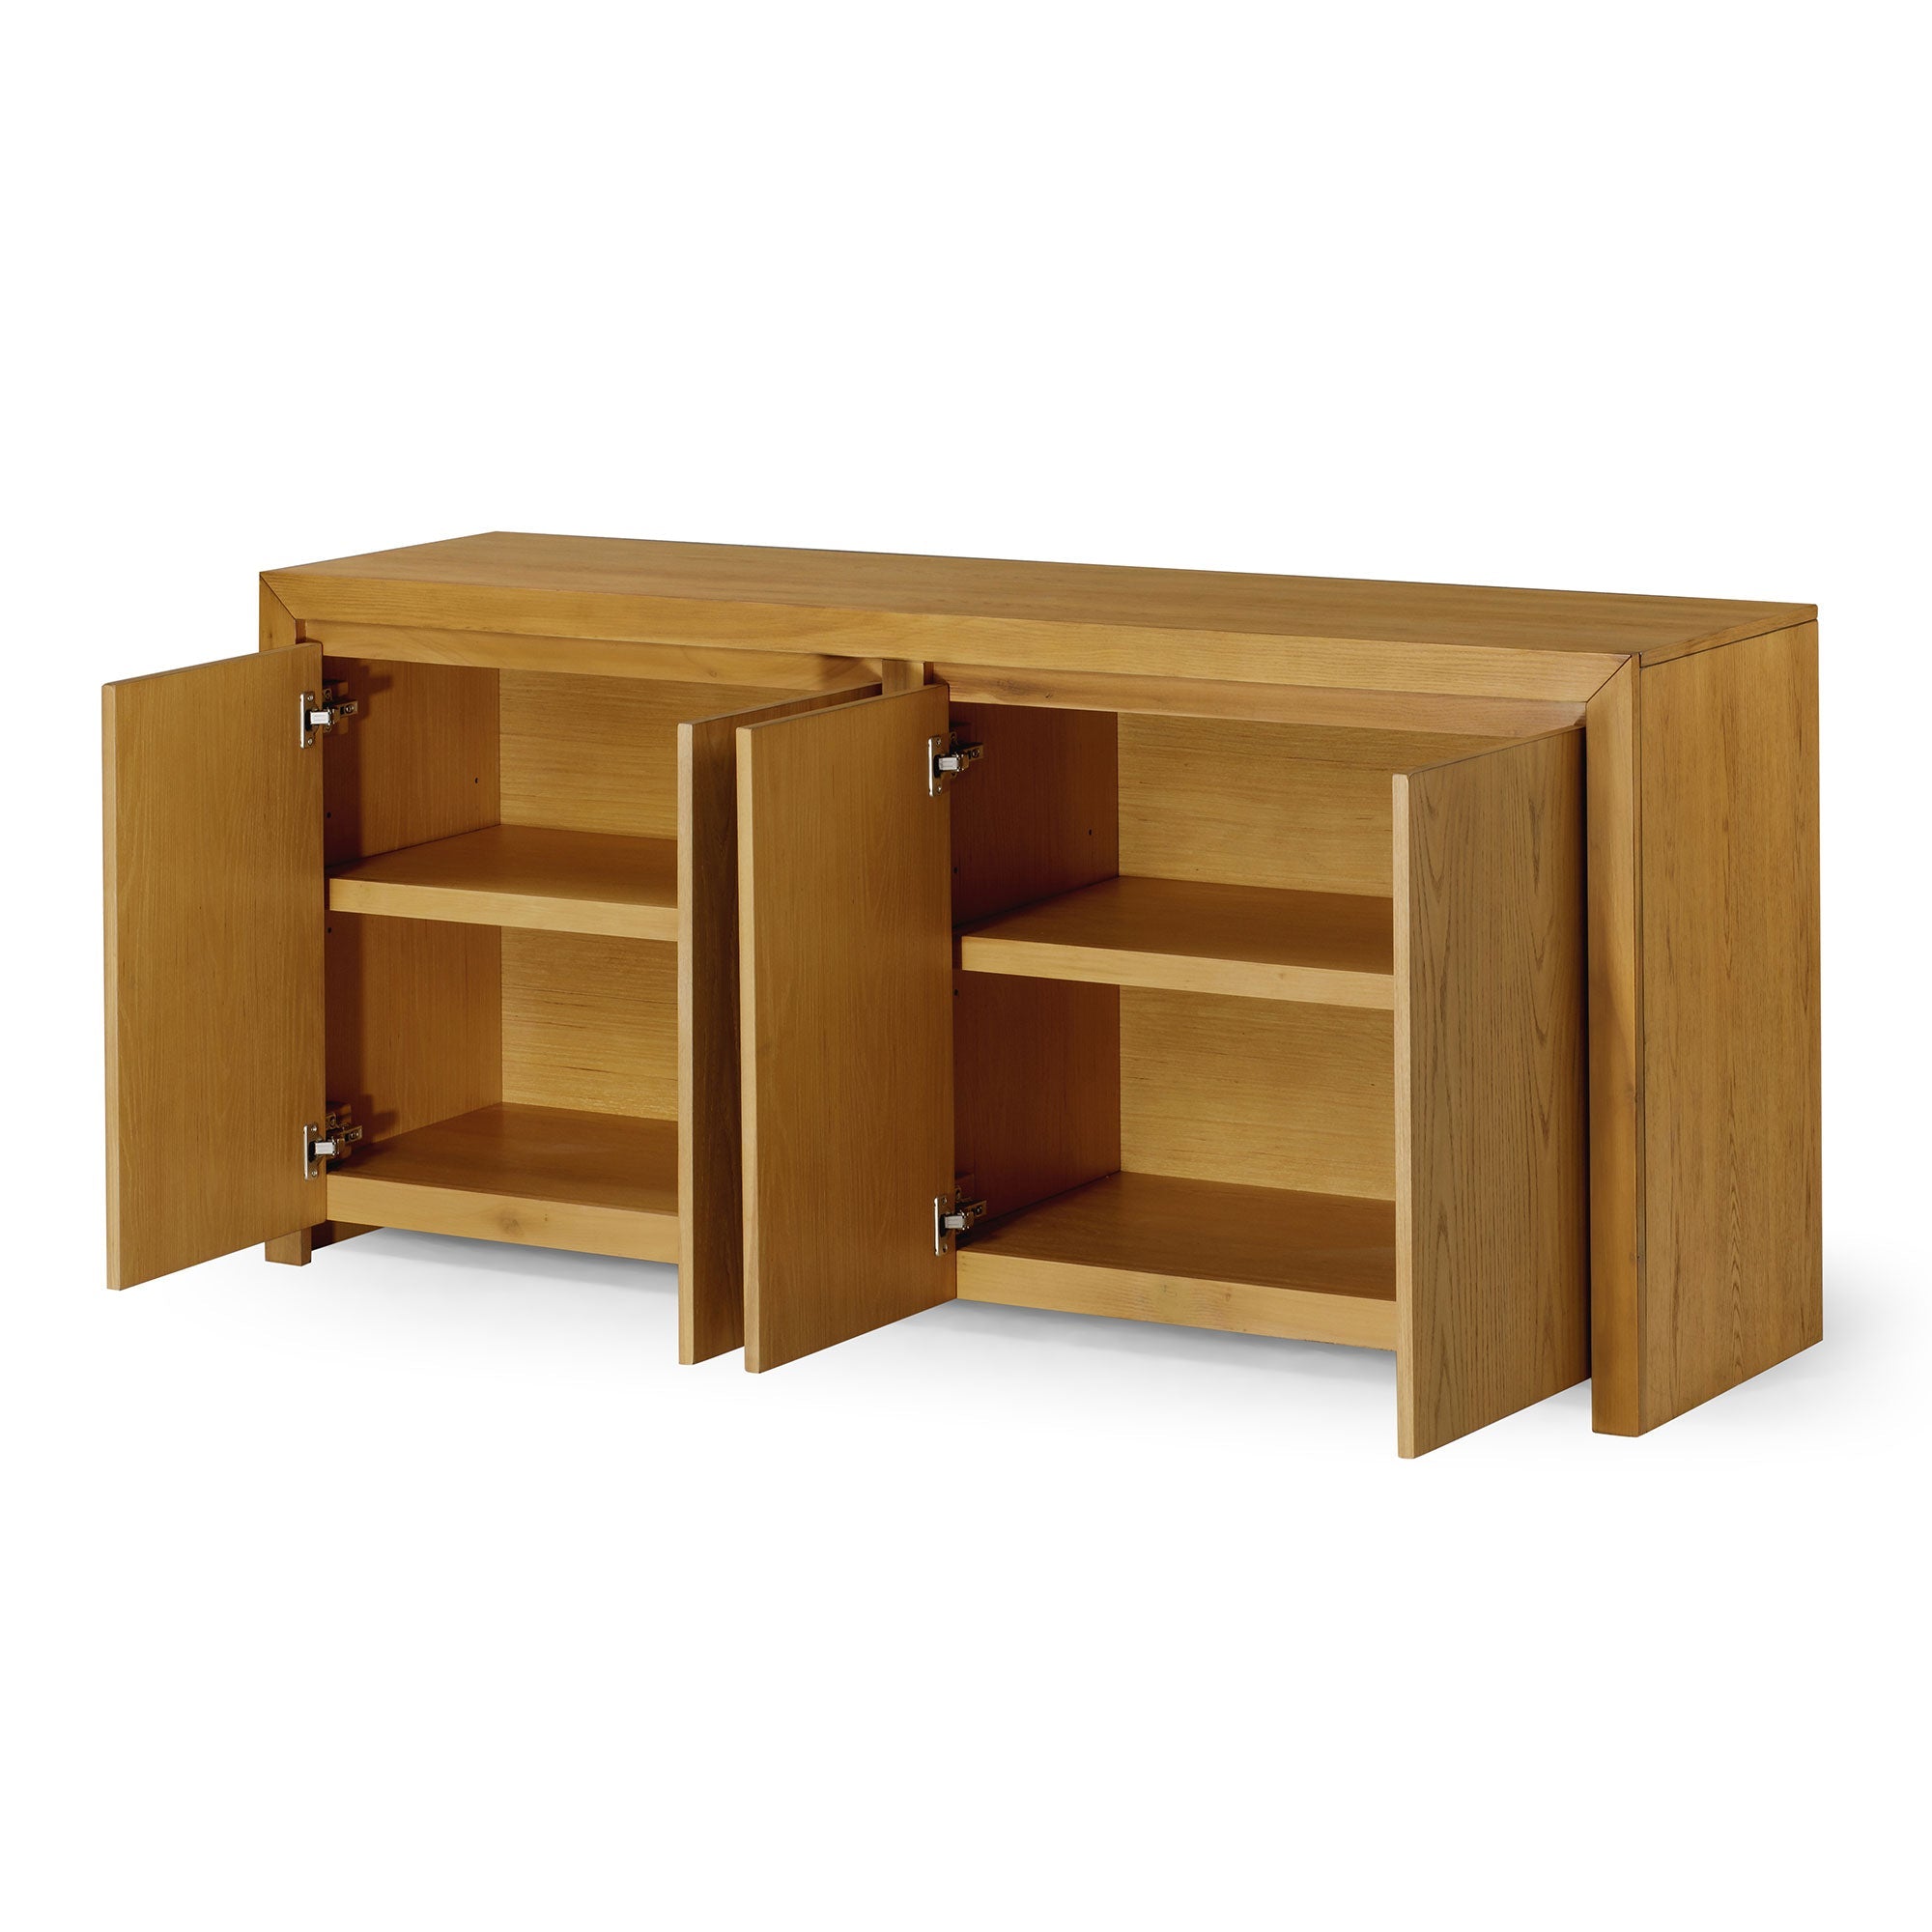 Iris Contemporary Wooden Sideboard in Refined Natural Finish in Cabinets by Maven Lane